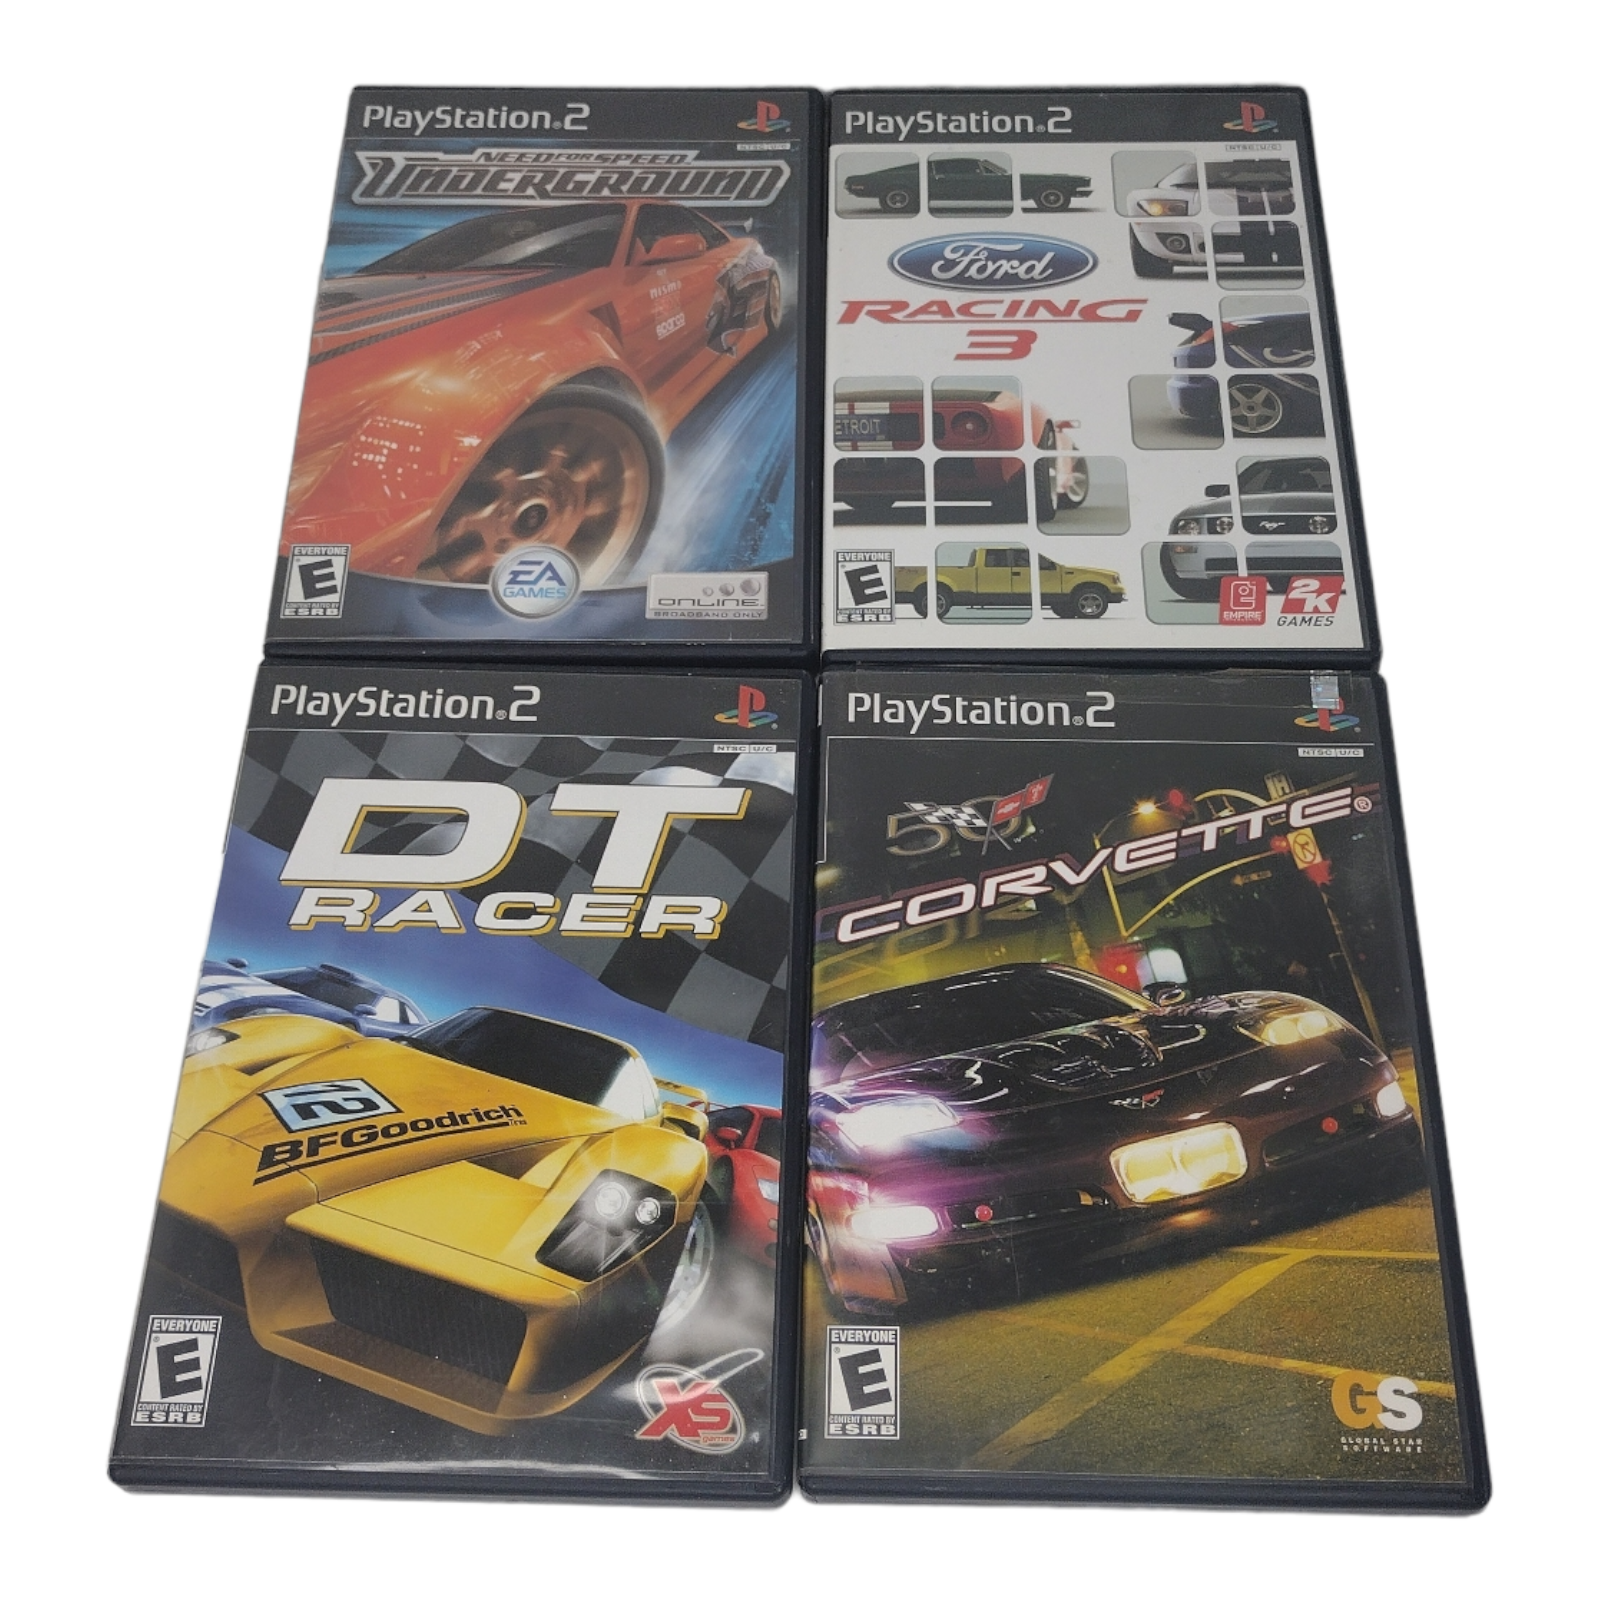 Primary image for Lot of 4 PlayStation 2 PS2 Racing Games DT Racer, Corvette, Ford Racing 3